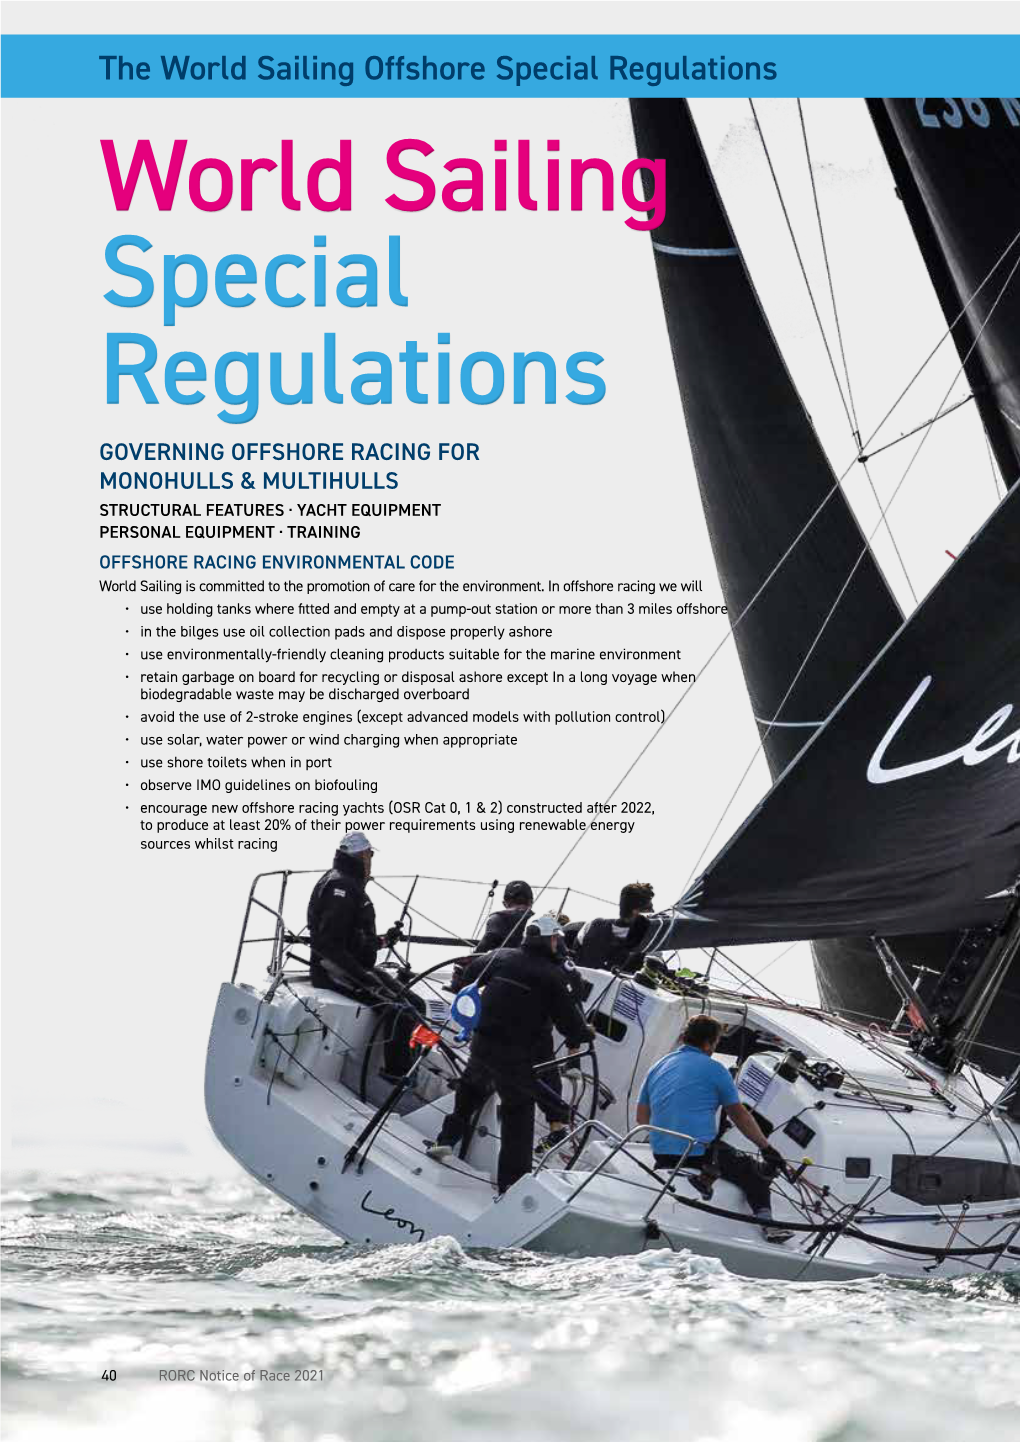 The World Sailing Offshore Special Regulations